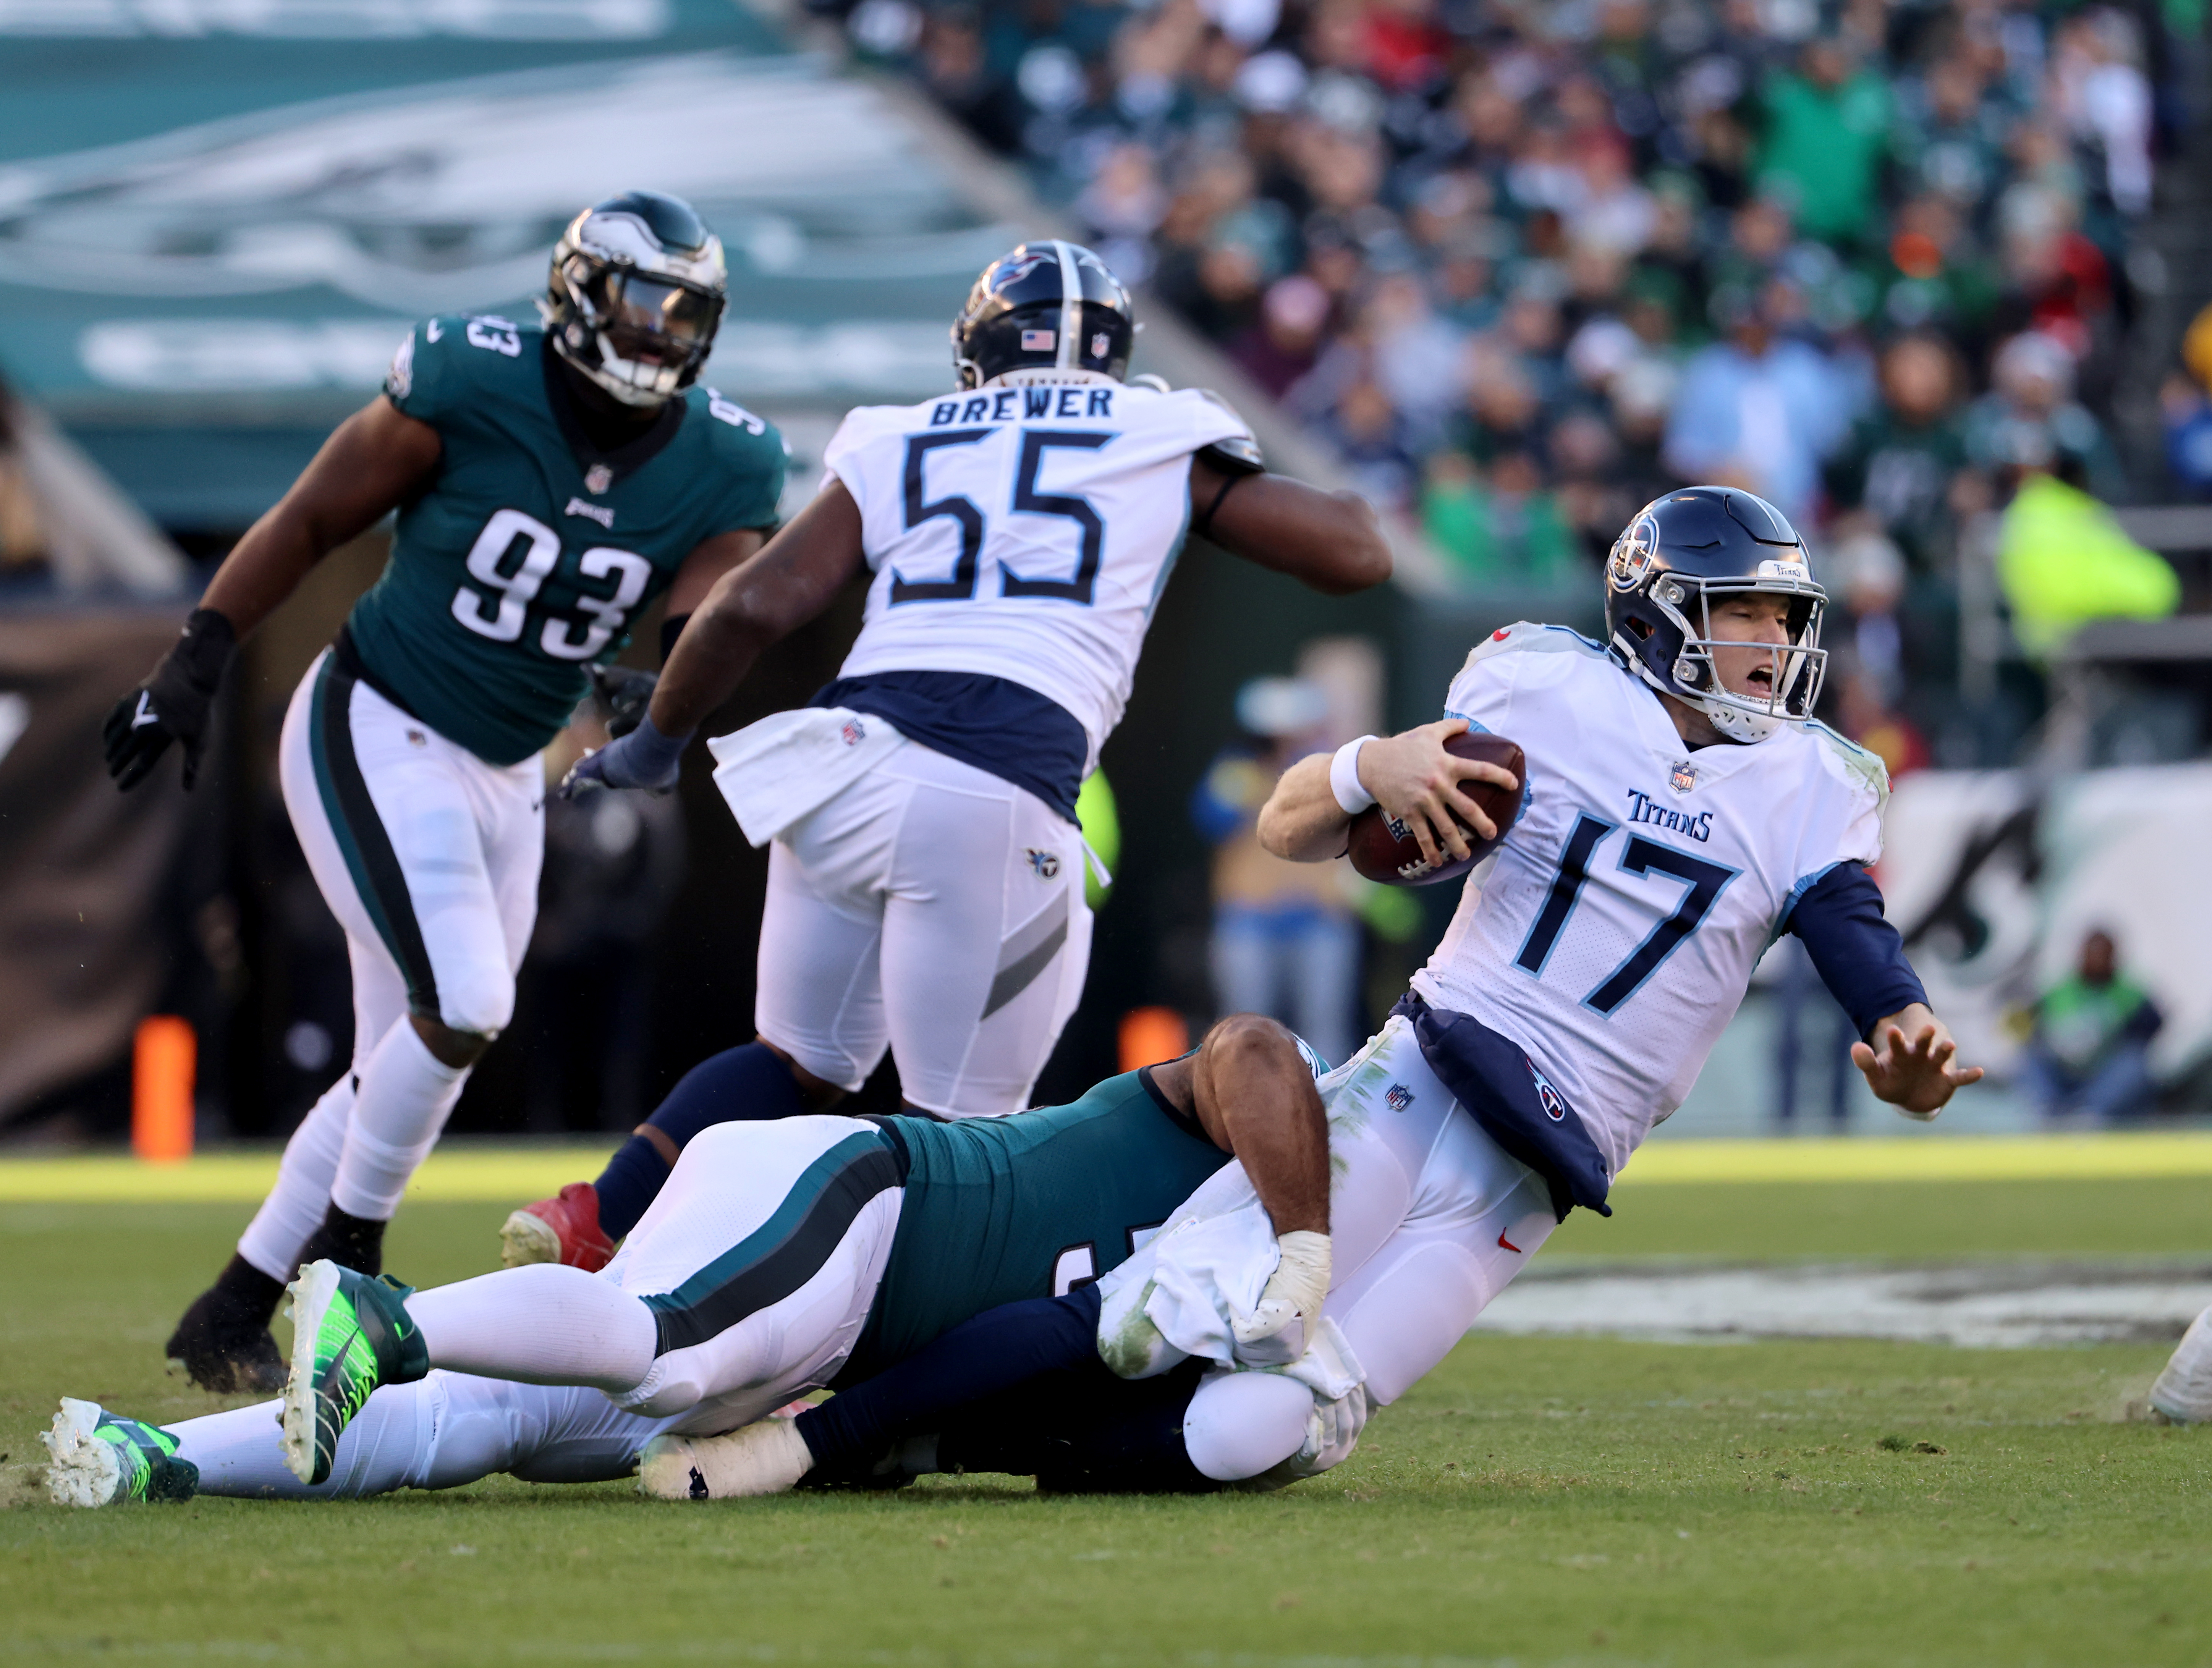 Highlights and Touchdowns: Titans 10-35 Eagles in NFL